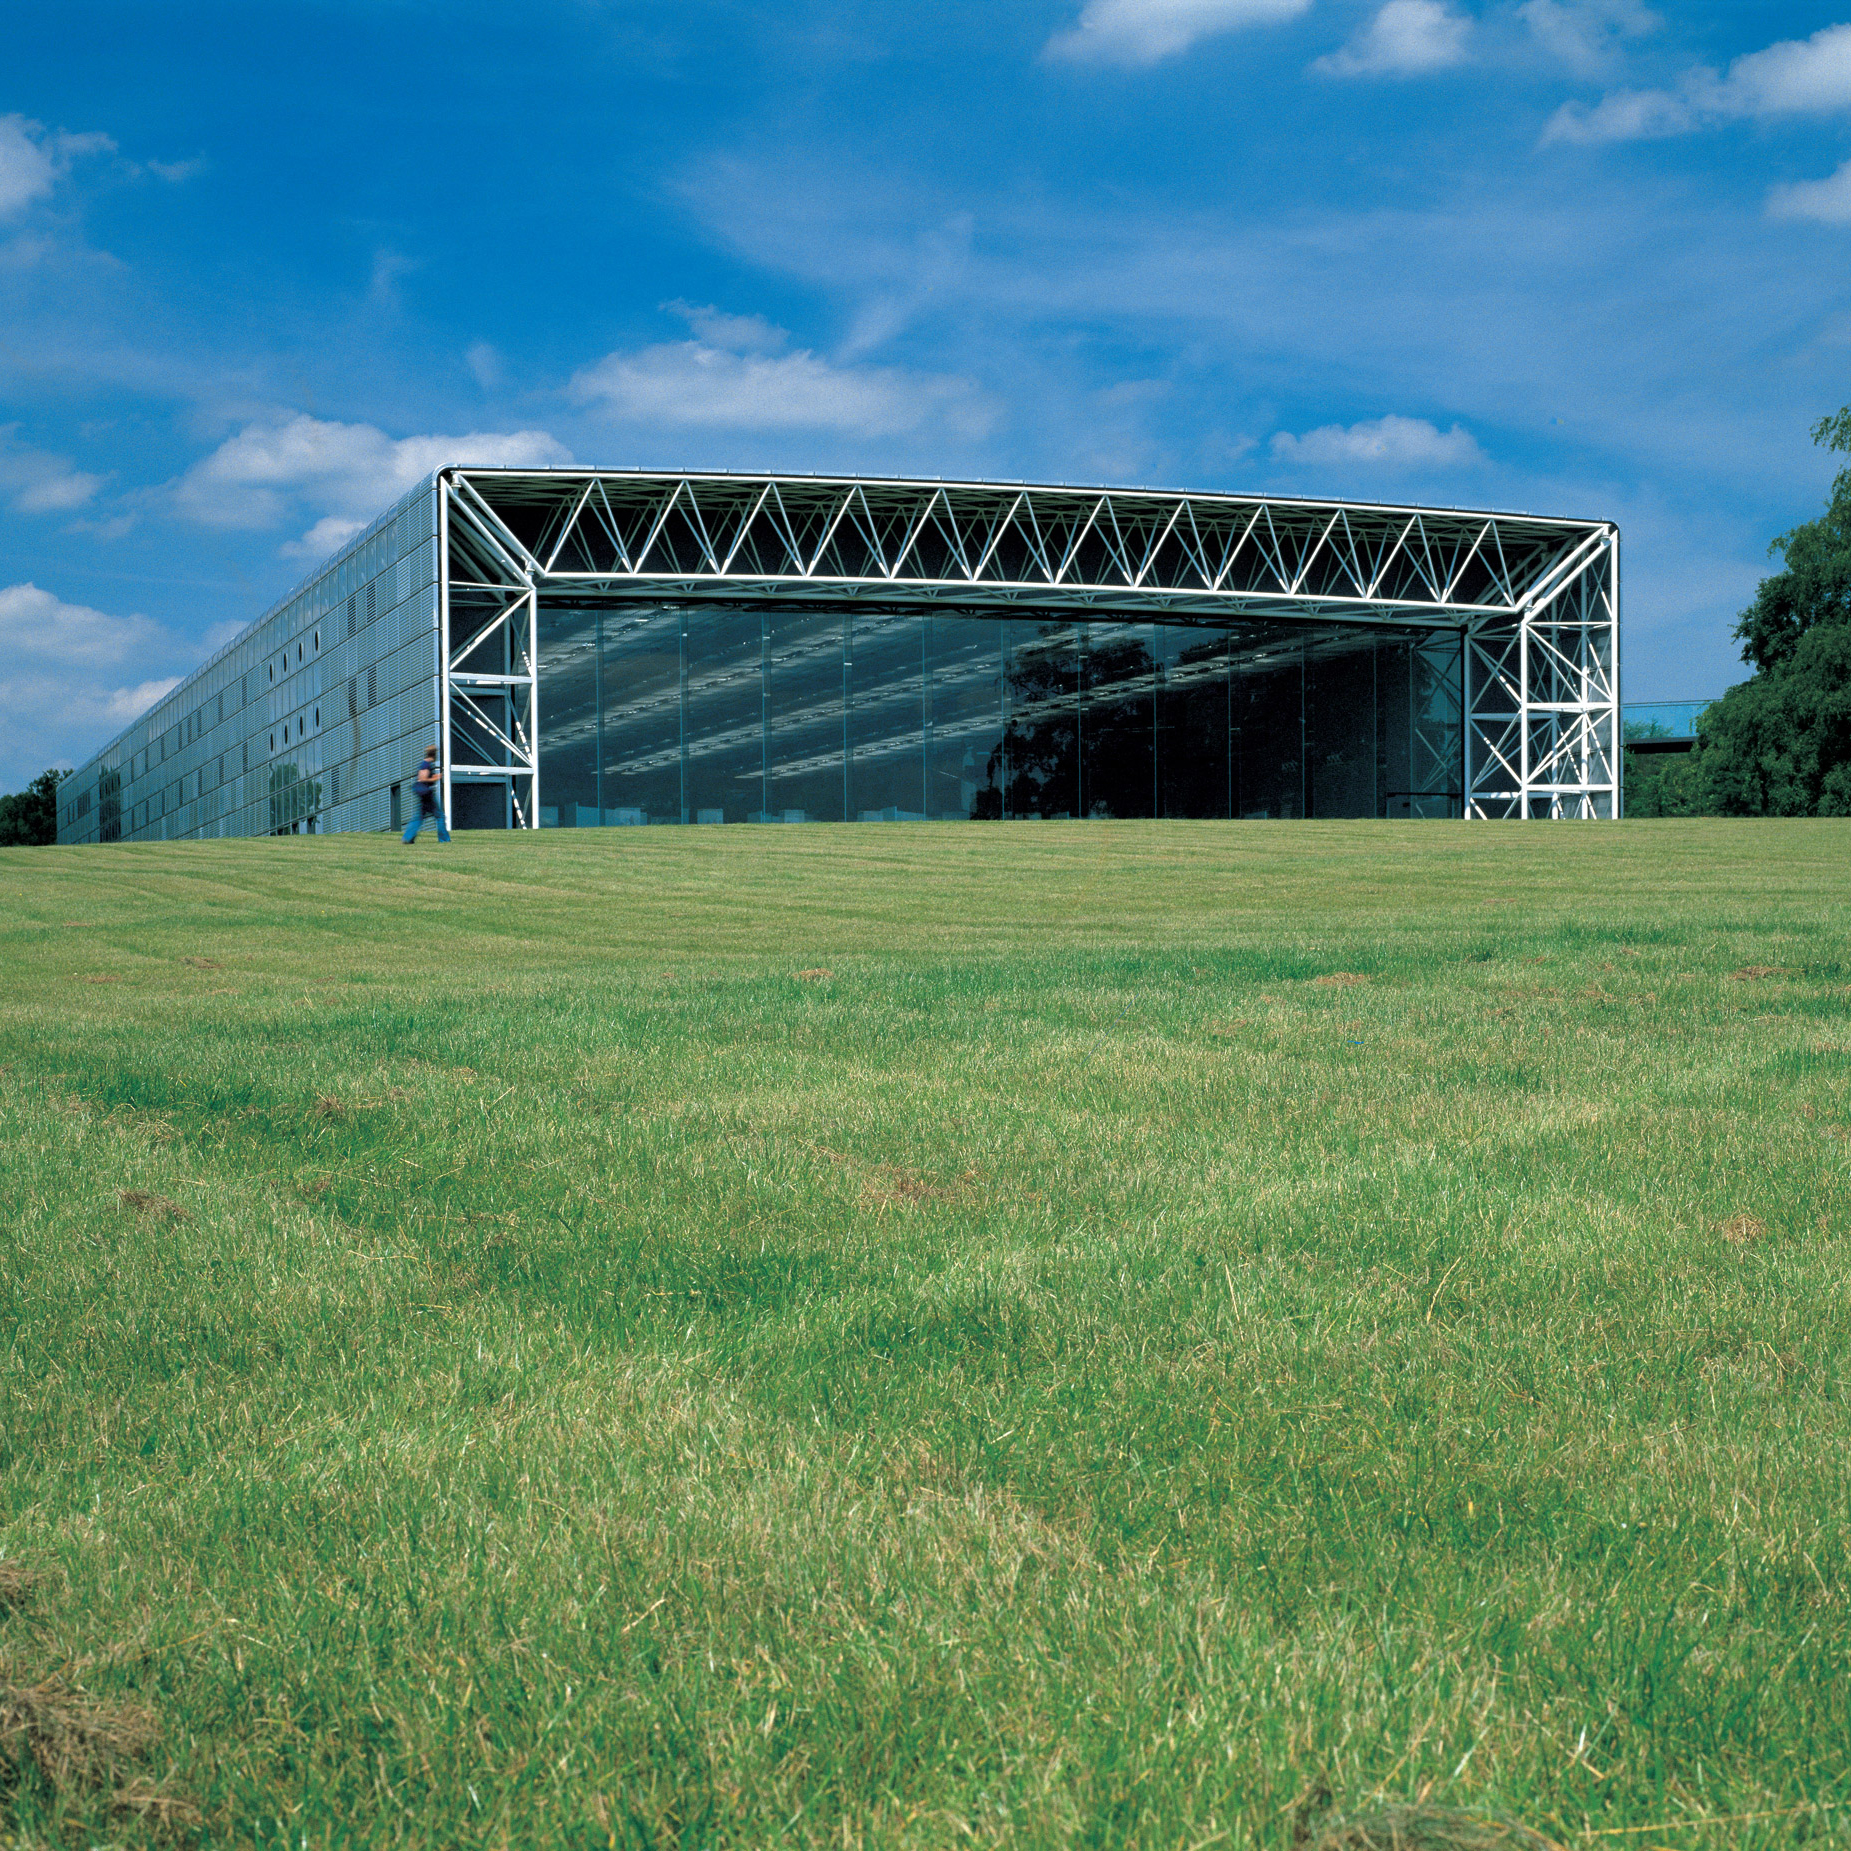 High-tech architecture from A to Z: Sainsbury Centre for the Visual Arts by Norman Foster